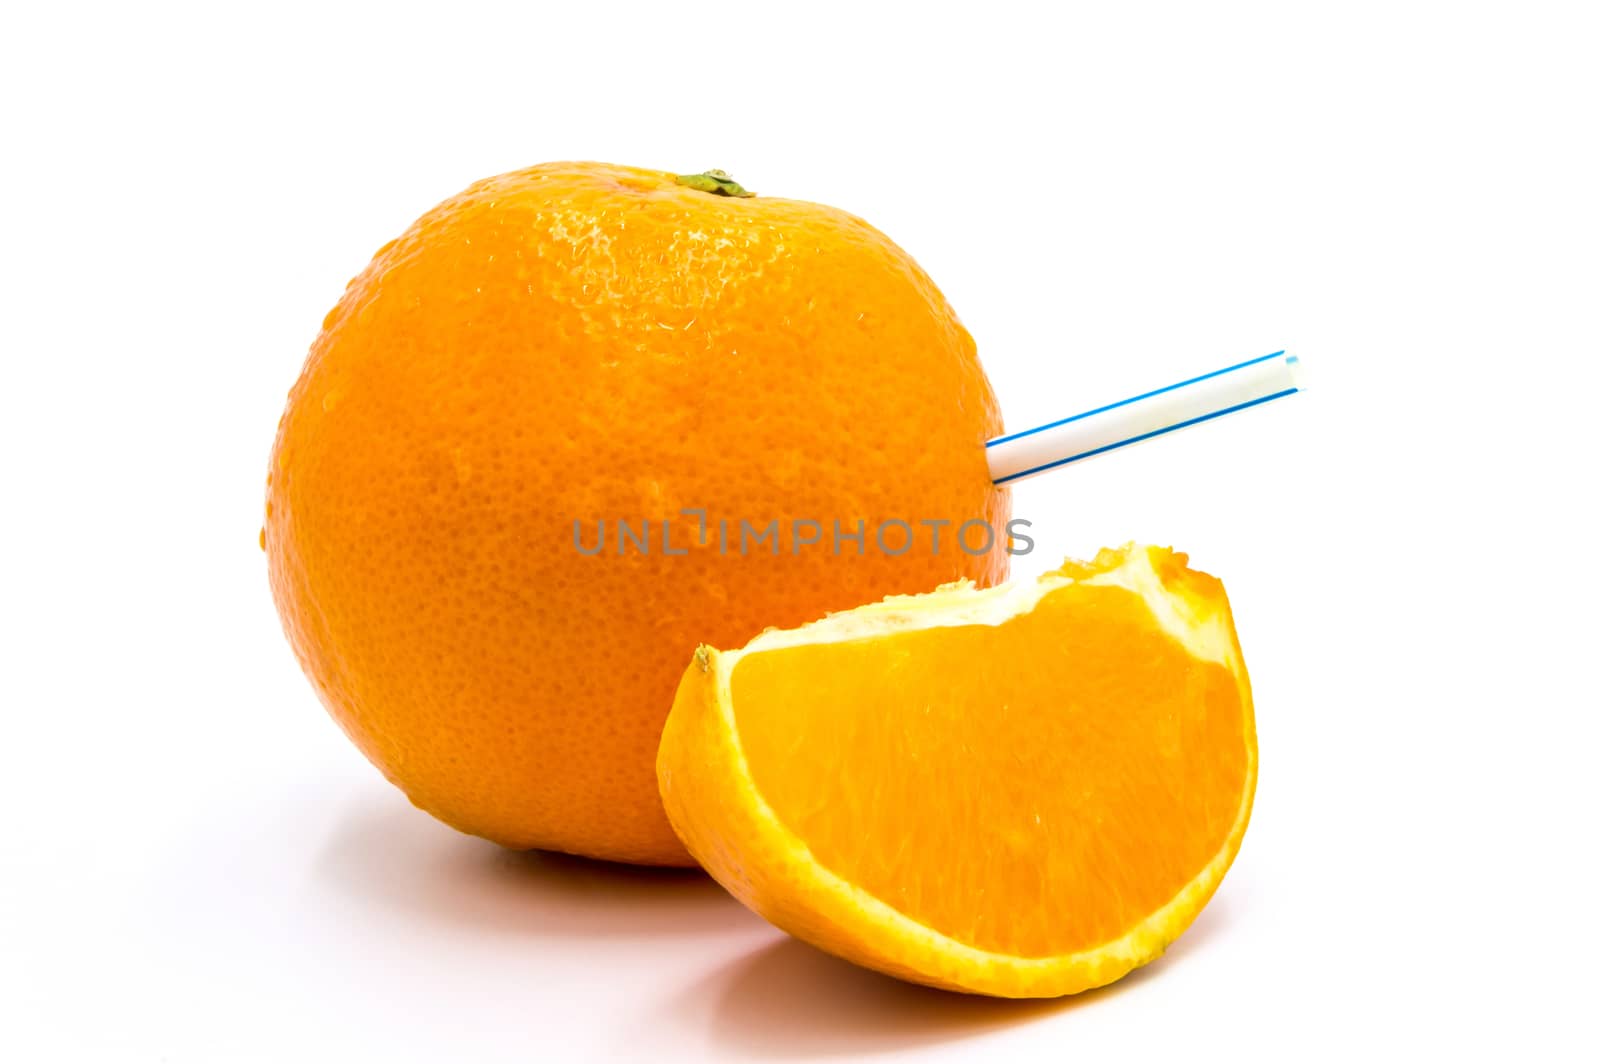 Close-up of drinking straw on an orange wedge  by Philou1000